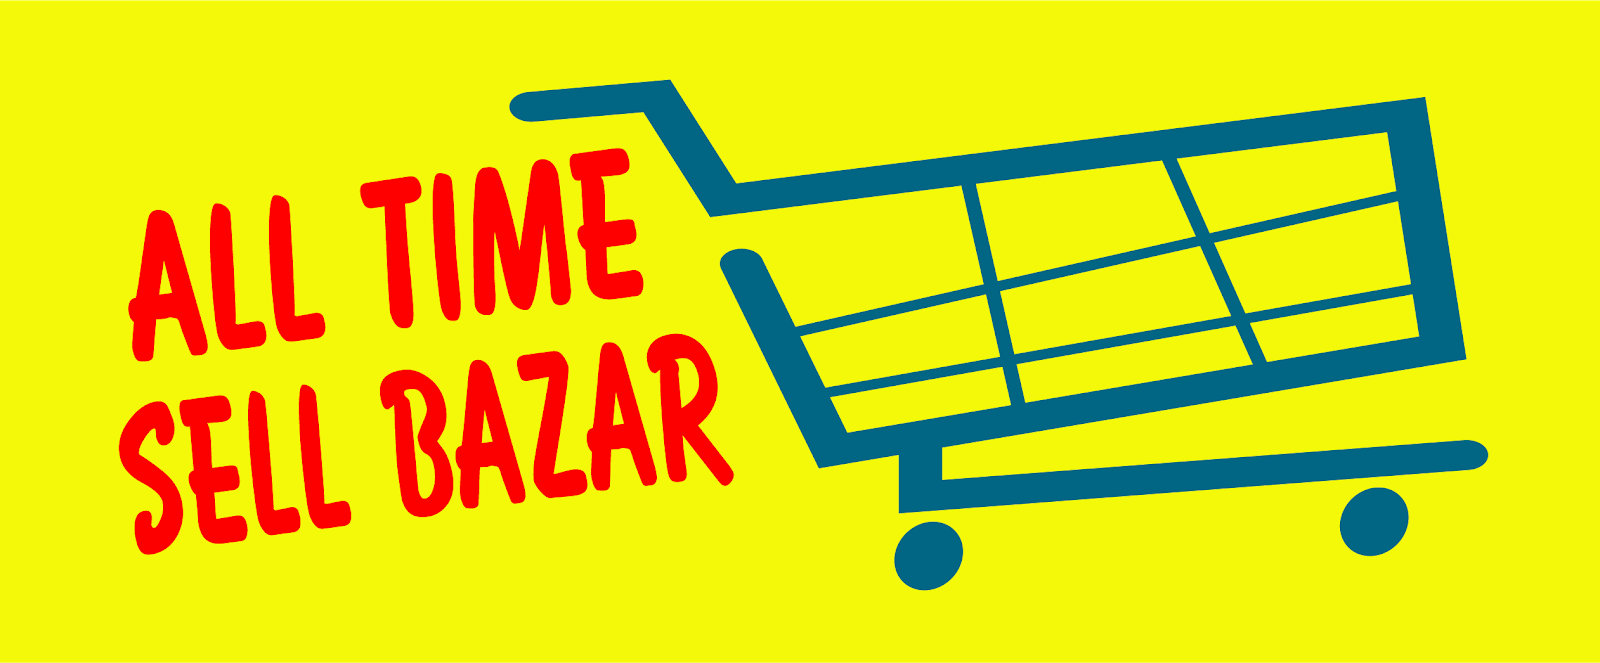 all time sell bazar